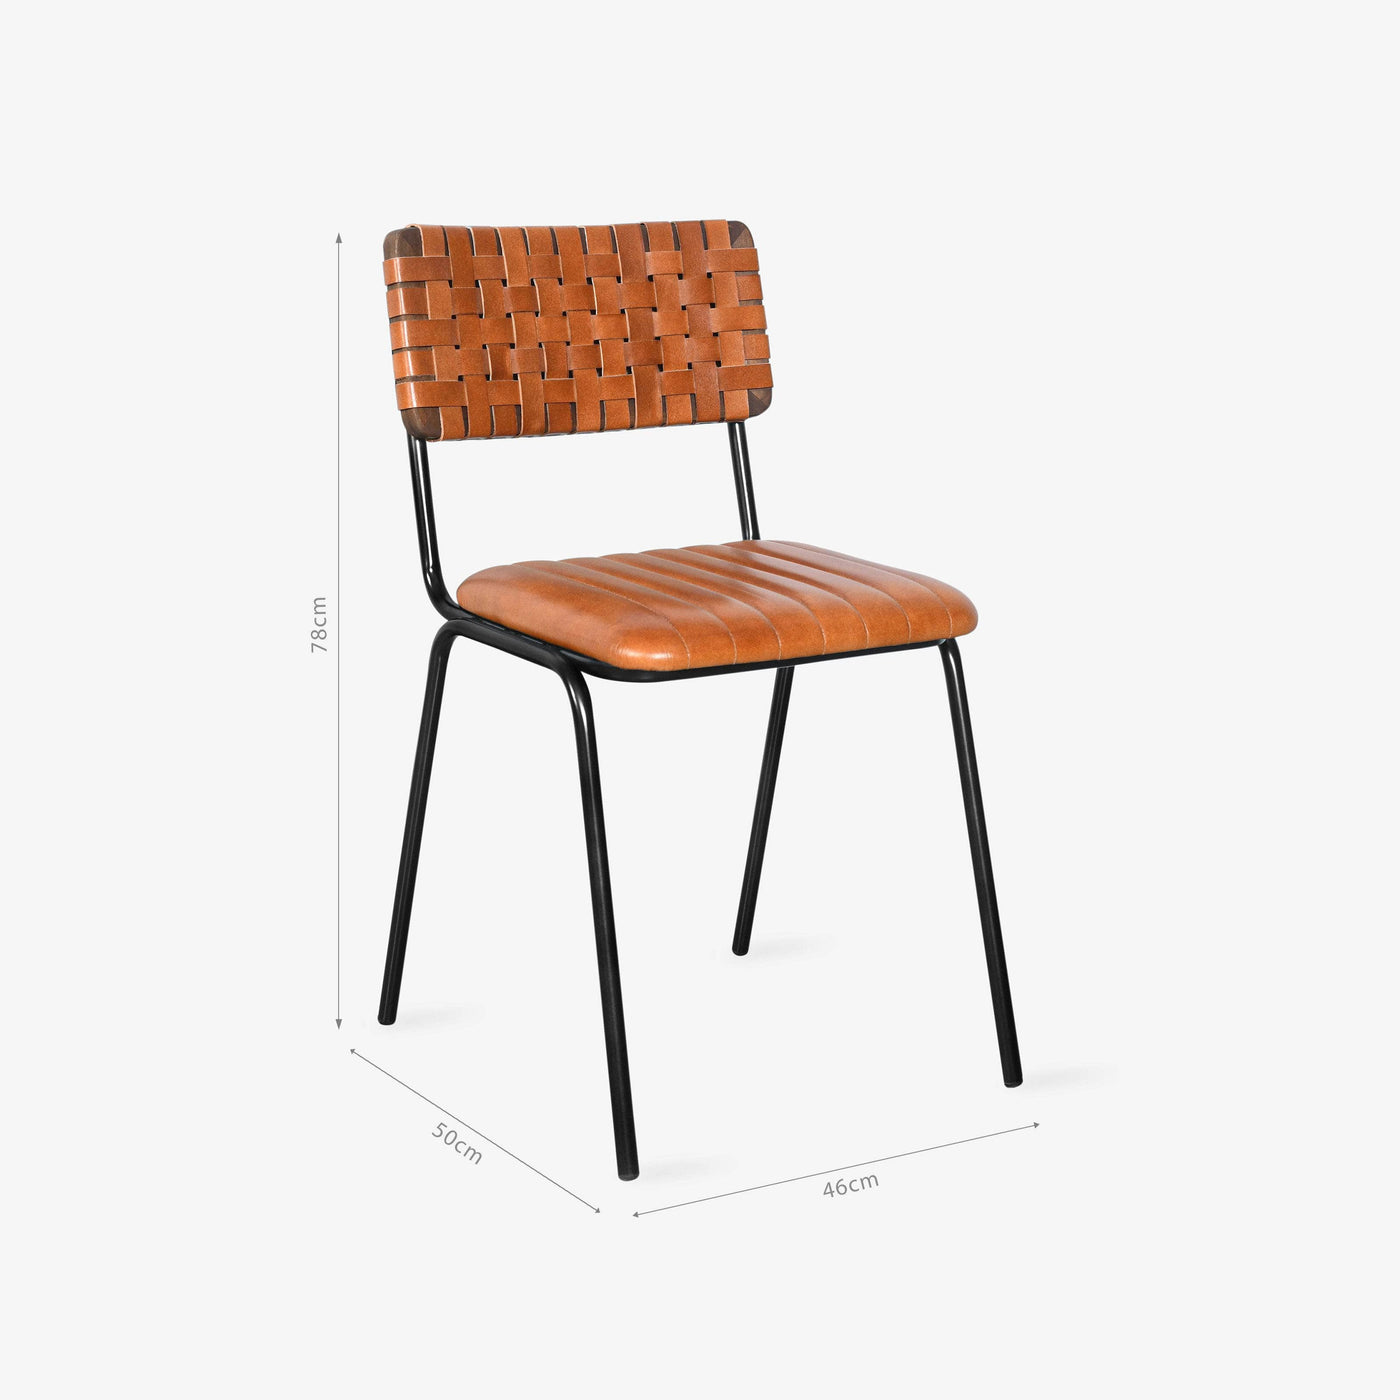 Algar Woven Leather Dining Chair, Tan Dining Chairs & Benches sazy.com